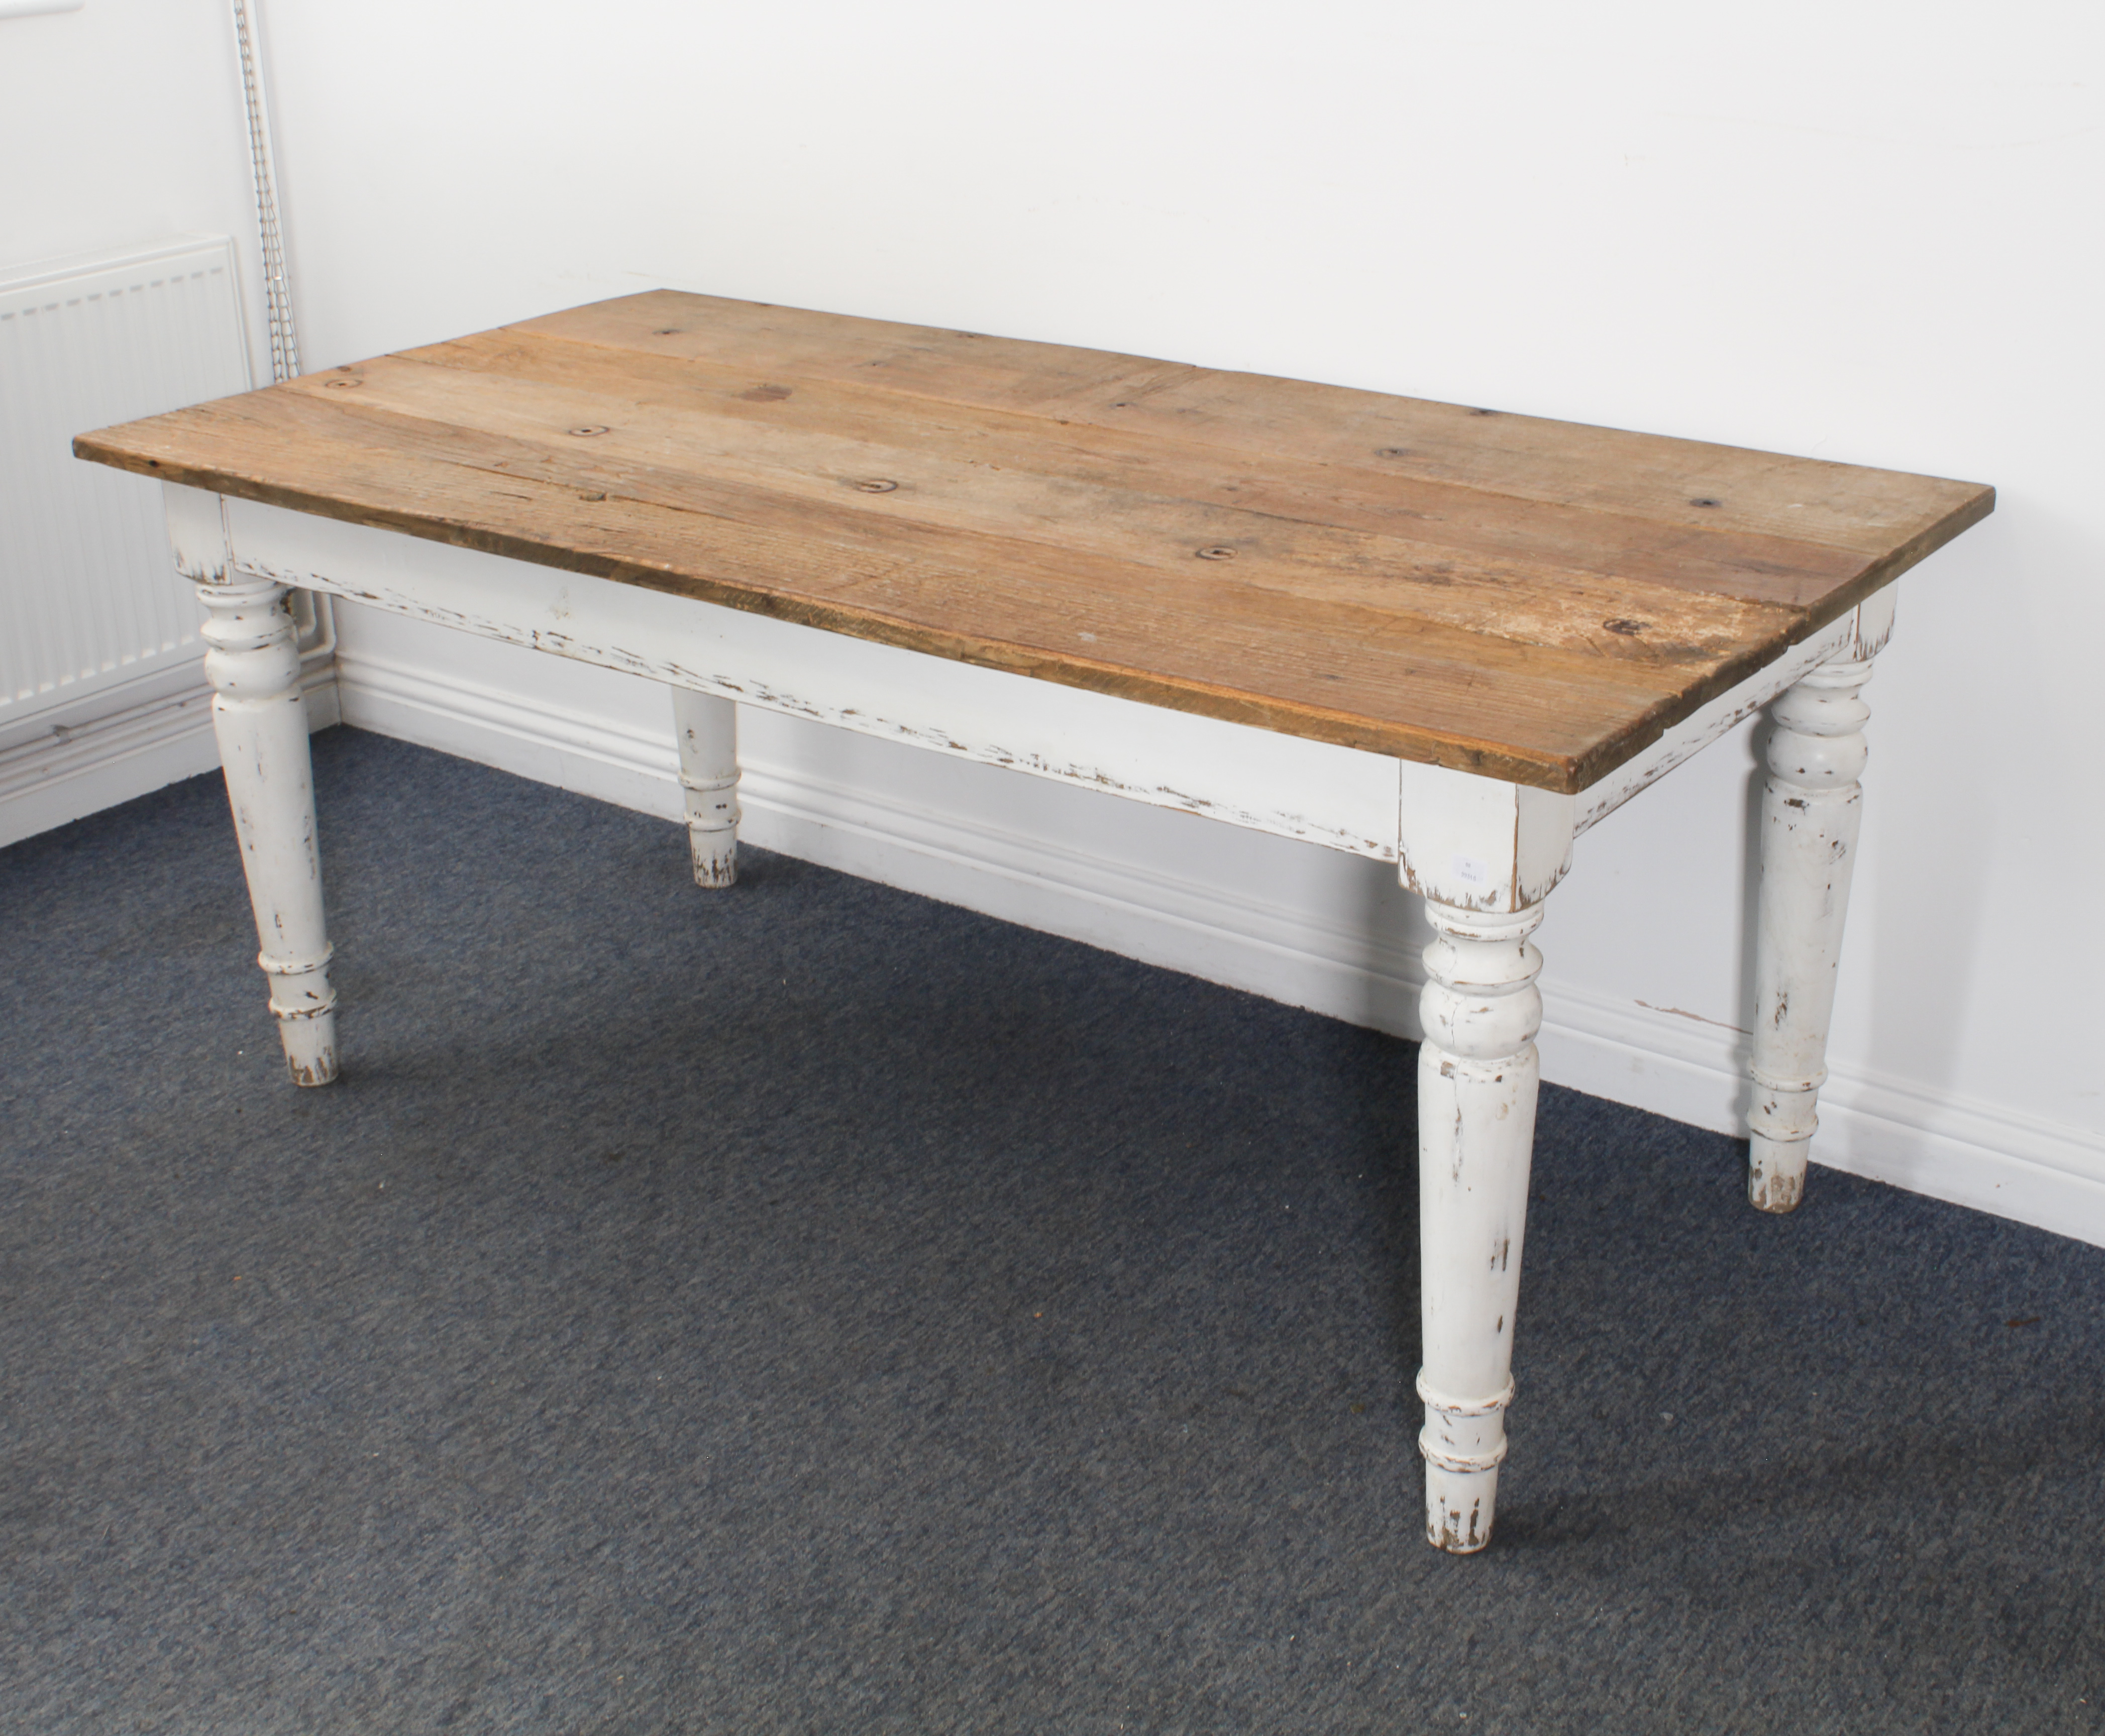 An oak farmhouse kitchen dining table in 19th century style - the rustic, planked top raised on an - Image 5 of 7